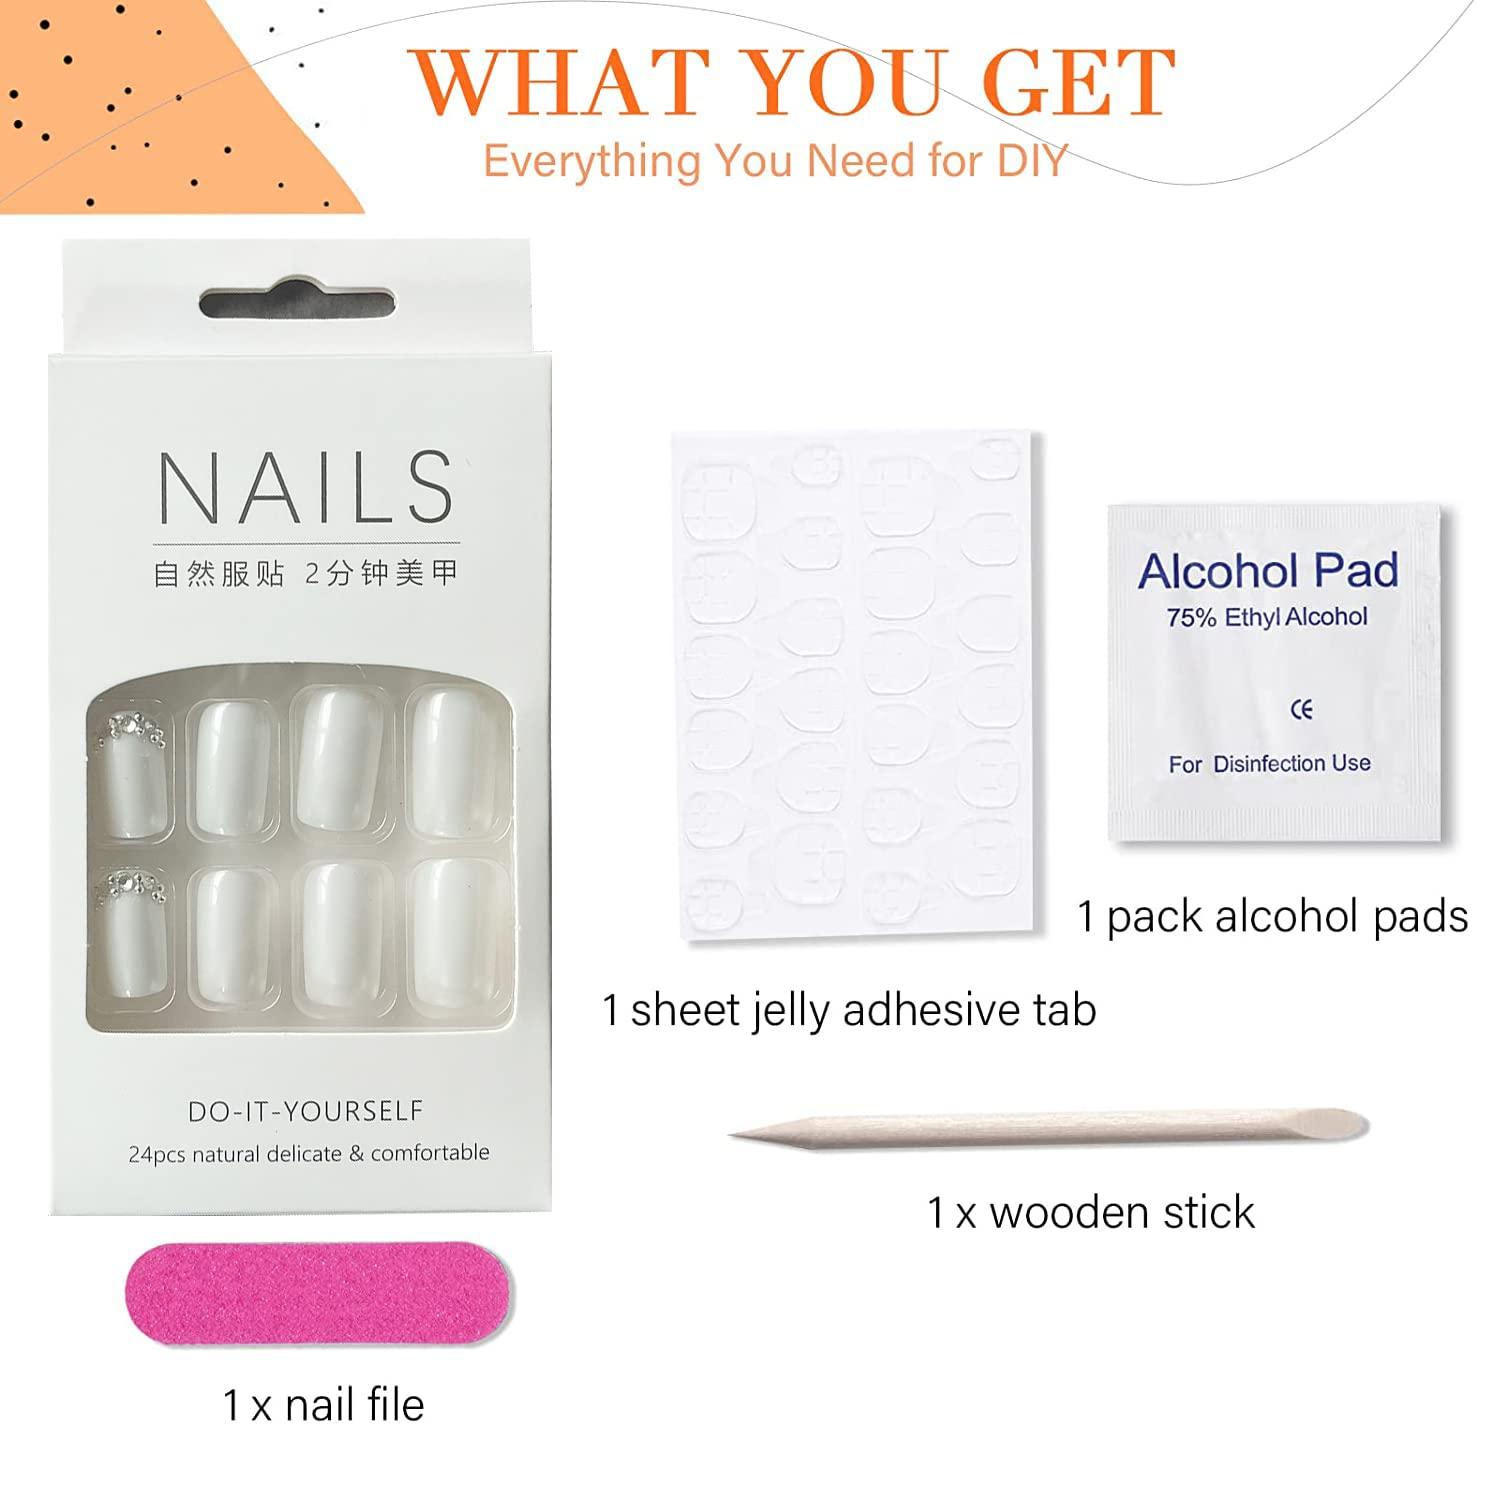 Square Press on Nails Short White Fake Nails Acrylic Artificial Glue on  Nails Decorations Sequin False